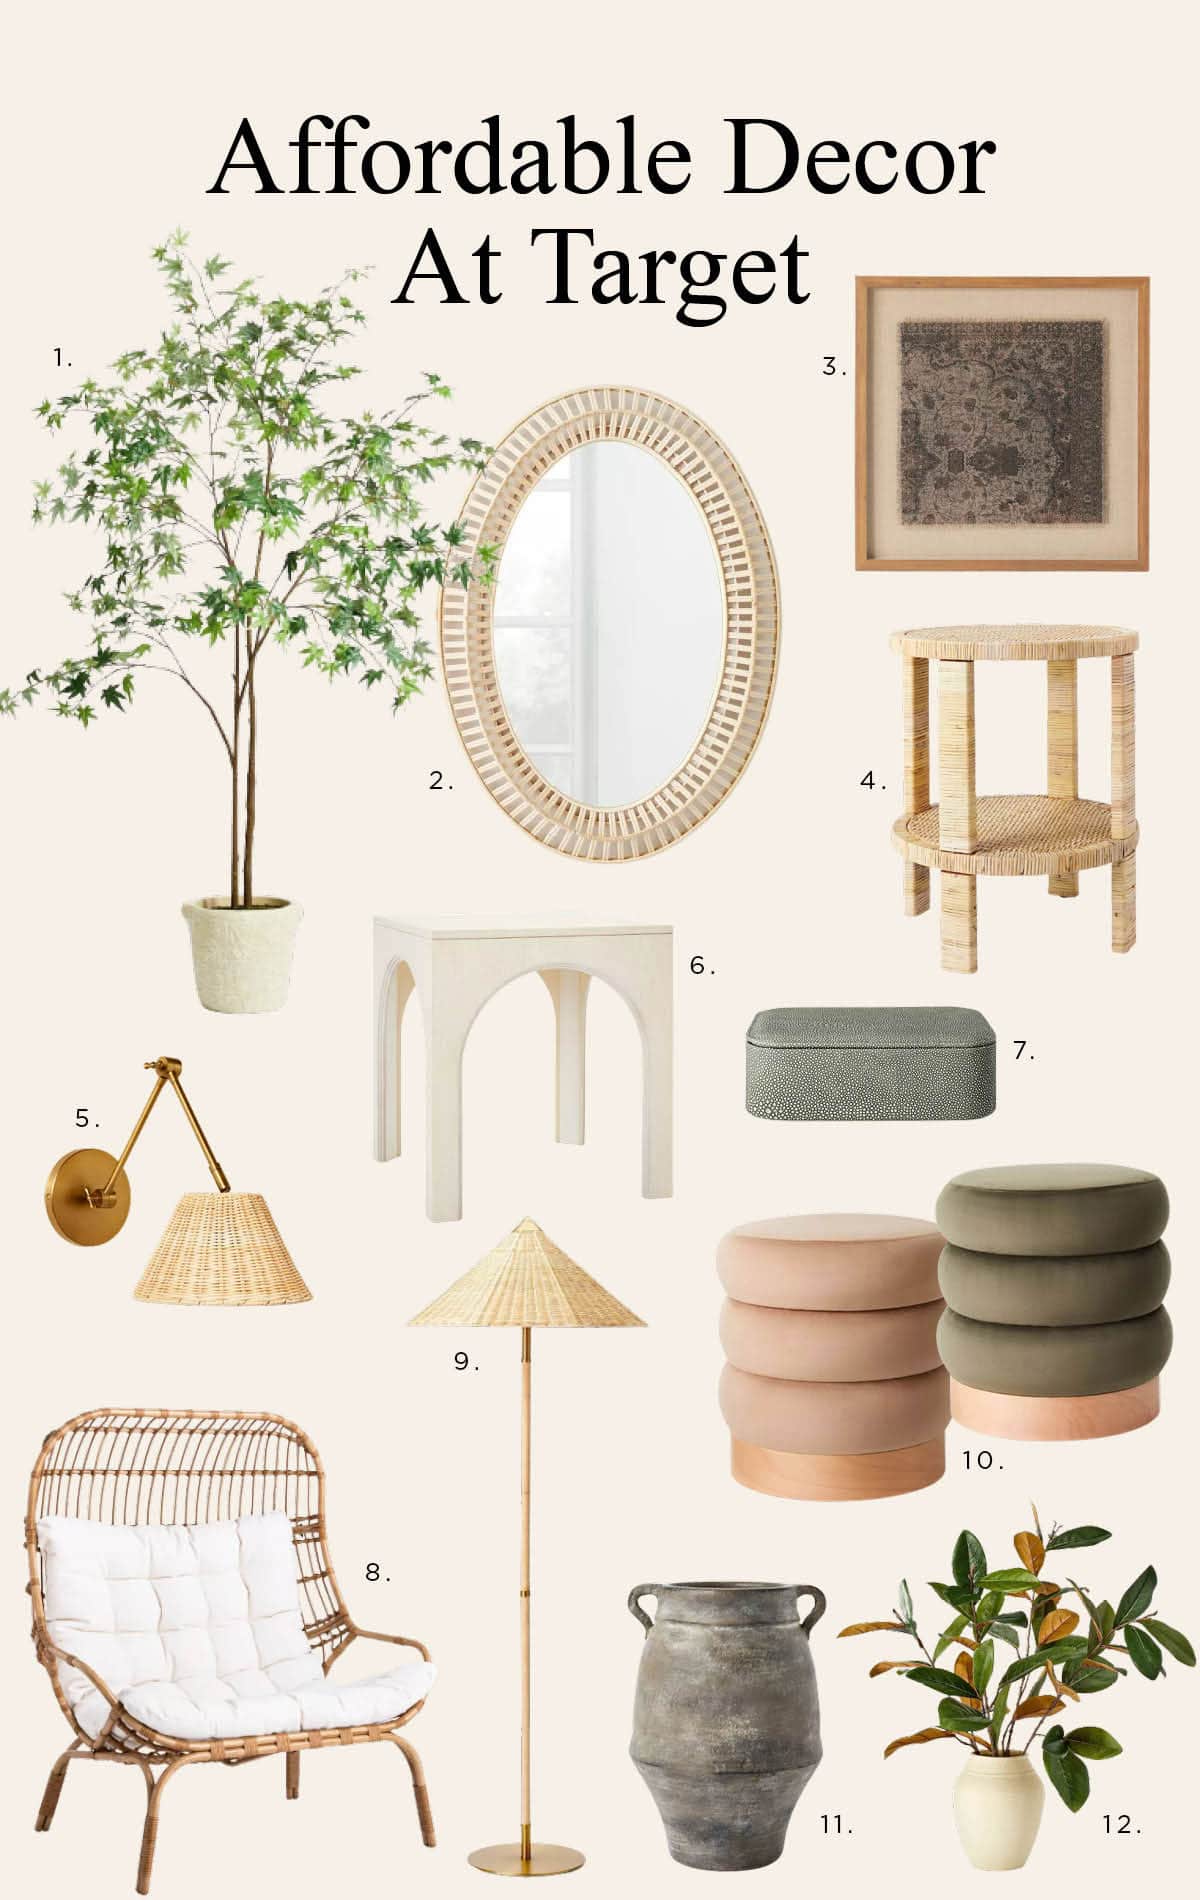 Best Affordable Decor From Target - I've scoured the internet to find the best affordable modern home decor from Target. Shop these budget friendly finds.